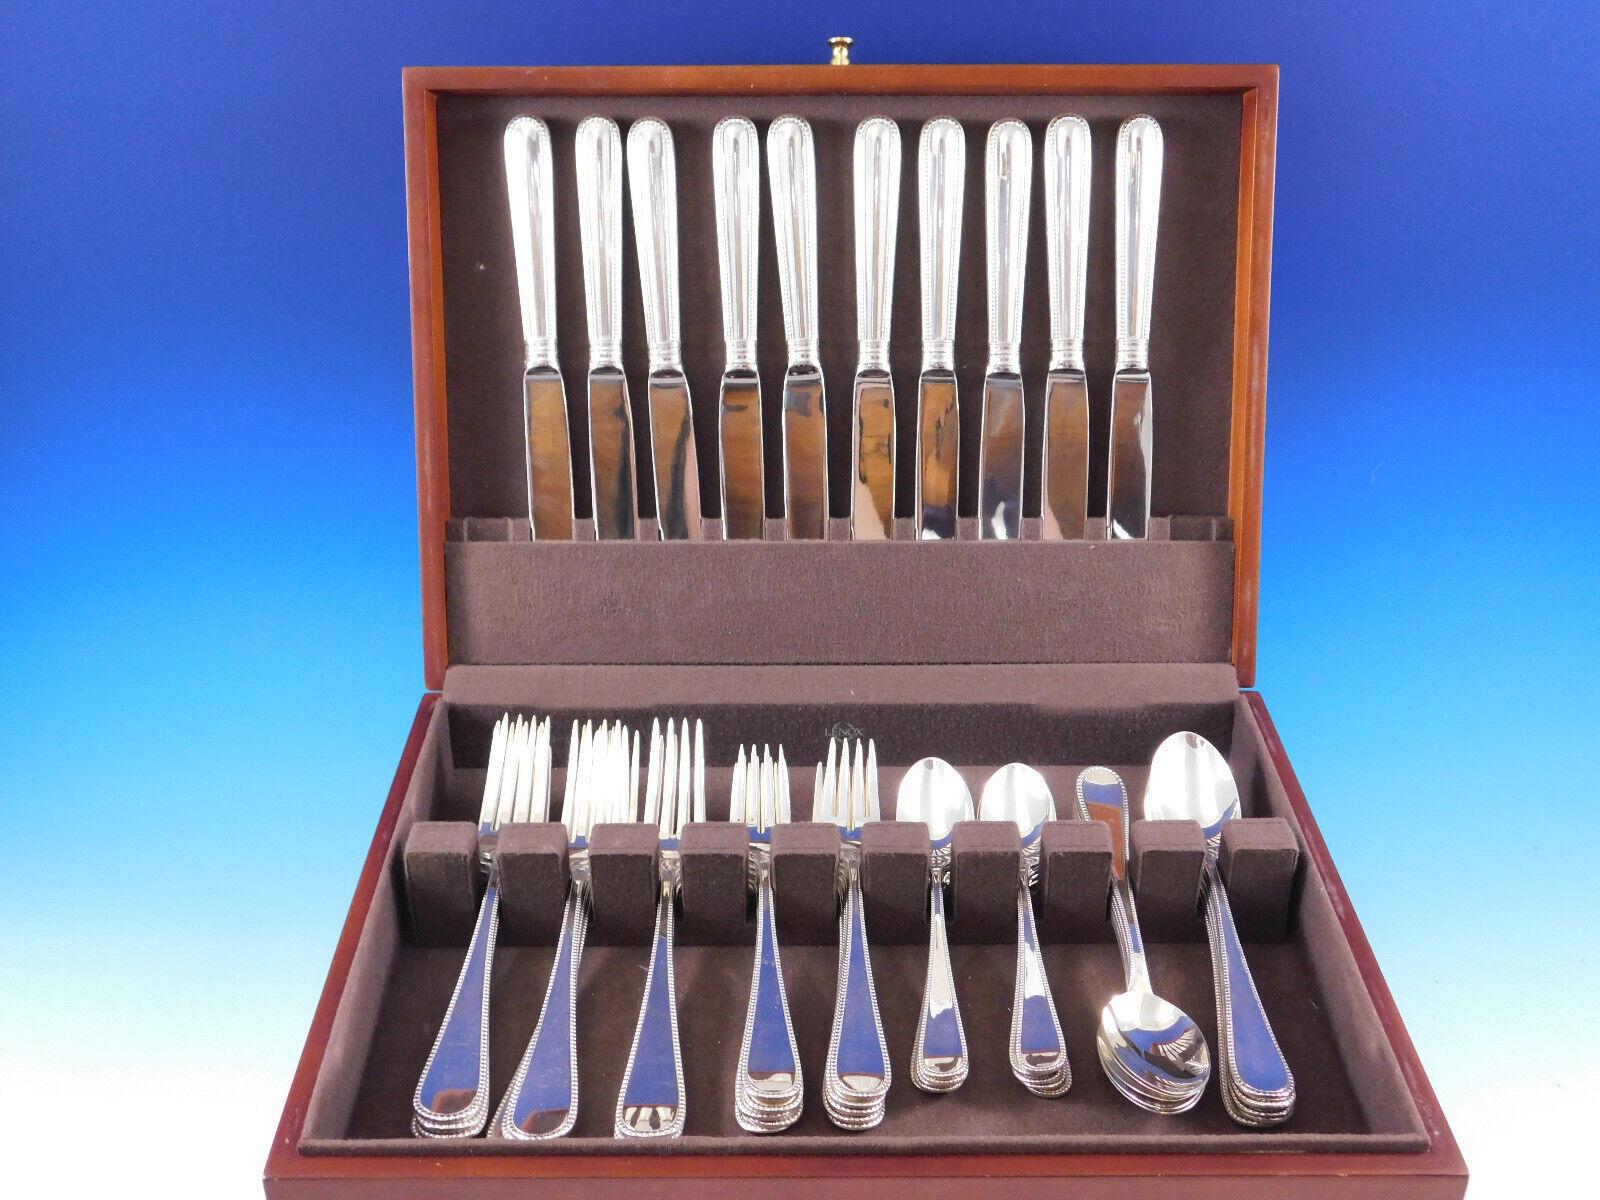 Palatina is part of the Italian Collection by Wallace Silversmiths, inspired by traditional European continental size sterling silver flatware. This pattern features an elegant beaded handle. Each place setting is made in a true Continental Size,